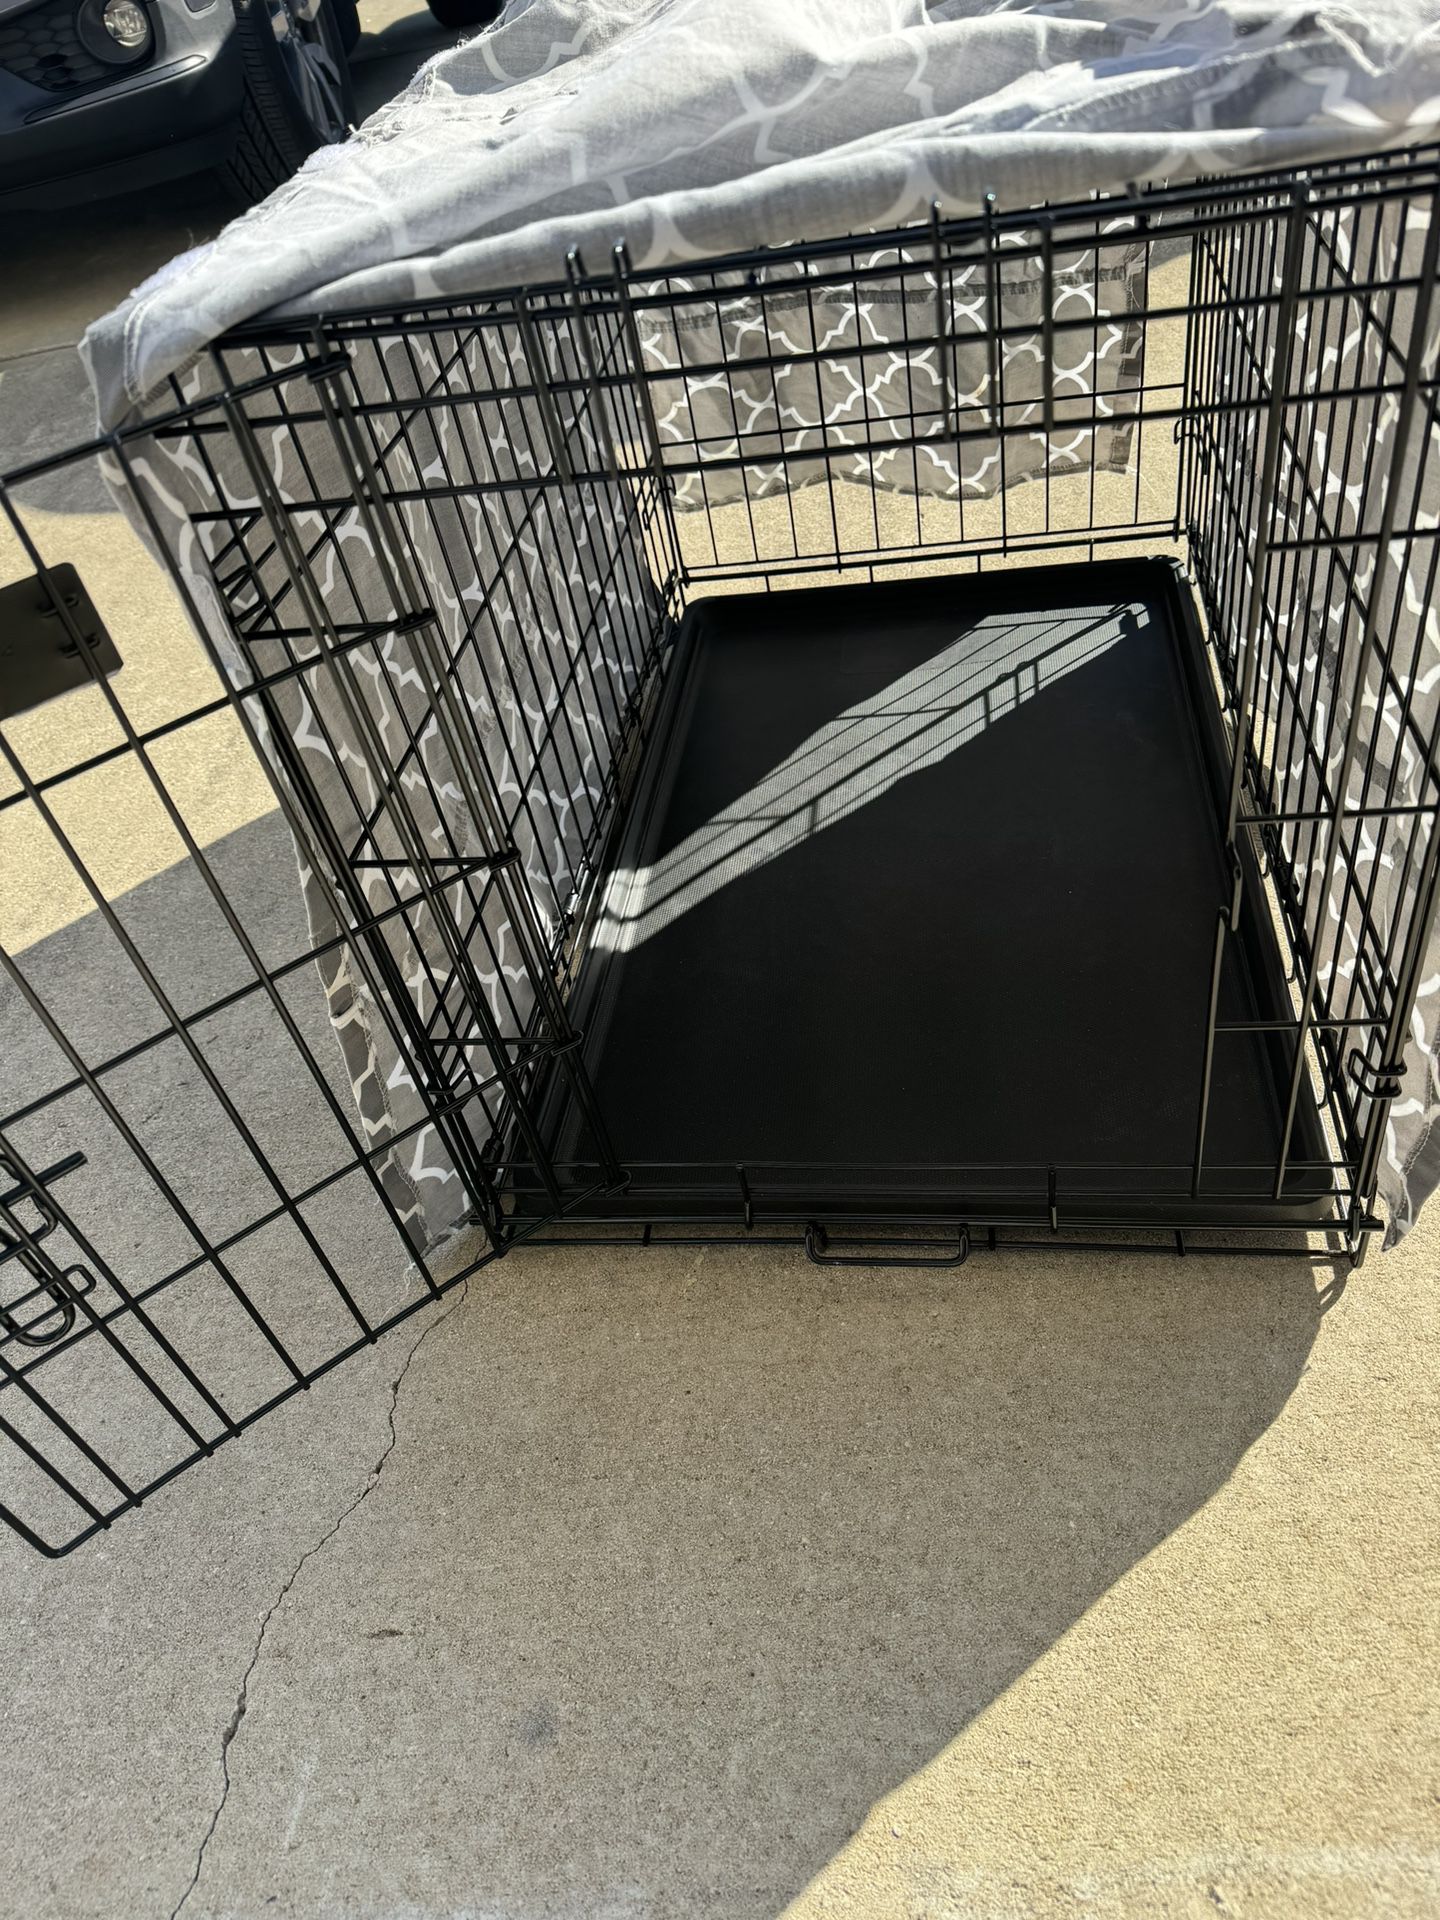 Dog Crate With Divider